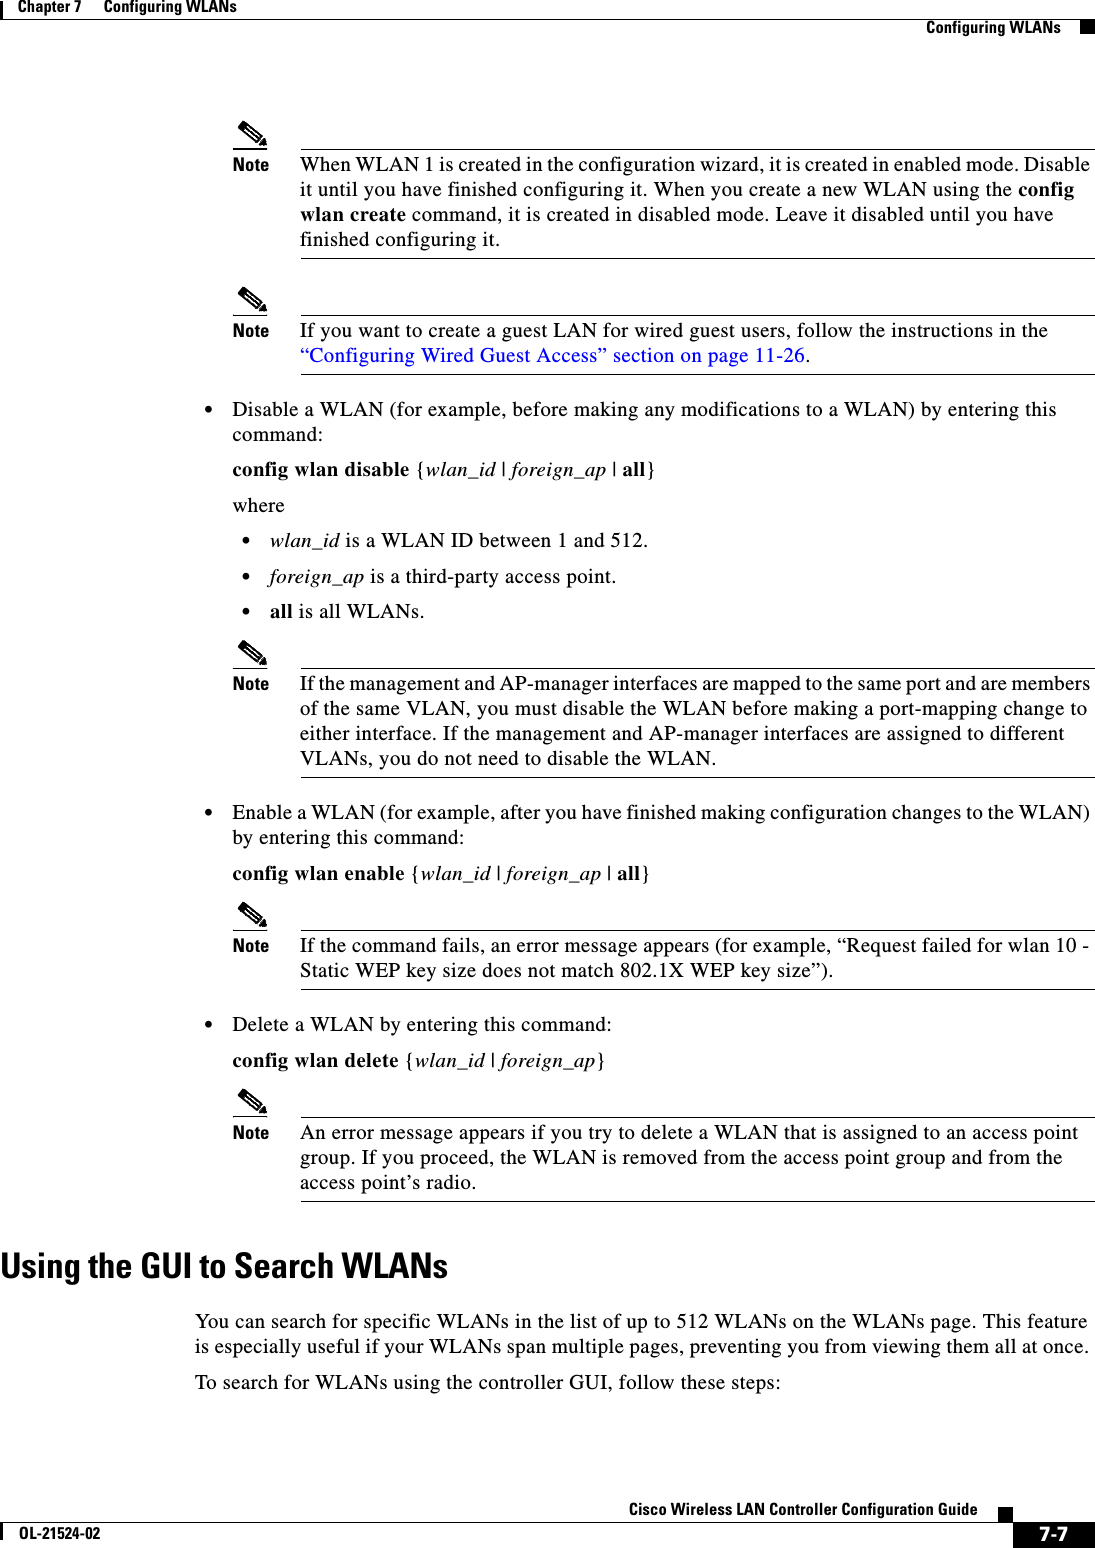  7-7Cisco Wireless LAN Controller Configuration GuideOL-21524-02Chapter 7      Configuring WLANs  Configuring WLANsNote When WLAN 1 is created in the configuration wizard, it is created in enabled mode. Disable it until you have finished configuring it. When you create a new WLAN using the config wlan create command, it is created in disabled mode. Leave it disabled until you have finished configuring it.Note If you want to create a guest LAN for wired guest users, follow the instructions in the “Configuring Wired Guest Access” section on page 11-26.  • Disable a WLAN (for example, before making any modifications to a WLAN) by entering this command:config wlan disable {wlan_id | foreign_ap | all}where  • wlan_id is a WLAN ID between 1 and 512.  • foreign_ap is a third-party access point.  • all is all WLANs.Note If the management and AP-manager interfaces are mapped to the same port and are members of the same VLAN, you must disable the WLAN before making a port-mapping change to either interface. If the management and AP-manager interfaces are assigned to different VLANs, you do not need to disable the WLAN.  • Enable a WLAN (for example, after you have finished making configuration changes to the WLAN) by entering this command:config wlan enable {wlan_id | foreign_ap | all}Note If the command fails, an error message appears (for example, “Request failed for wlan 10 - Static WEP key size does not match 802.1X WEP key size”).  • Delete a WLAN by entering this command:config wlan delete {wlan_id | foreign_ap}Note An error message appears if you try to delete a WLAN that is assigned to an access point group. If you proceed, the WLAN is removed from the access point group and from the access point’s radio.Using the GUI to Search WLANsYou can search for specific WLANs in the list of up to 512 WLANs on the WLANs page. This feature is especially useful if your WLANs span multiple pages, preventing you from viewing them all at once. To search for WLANs using the controller GUI, follow these steps: